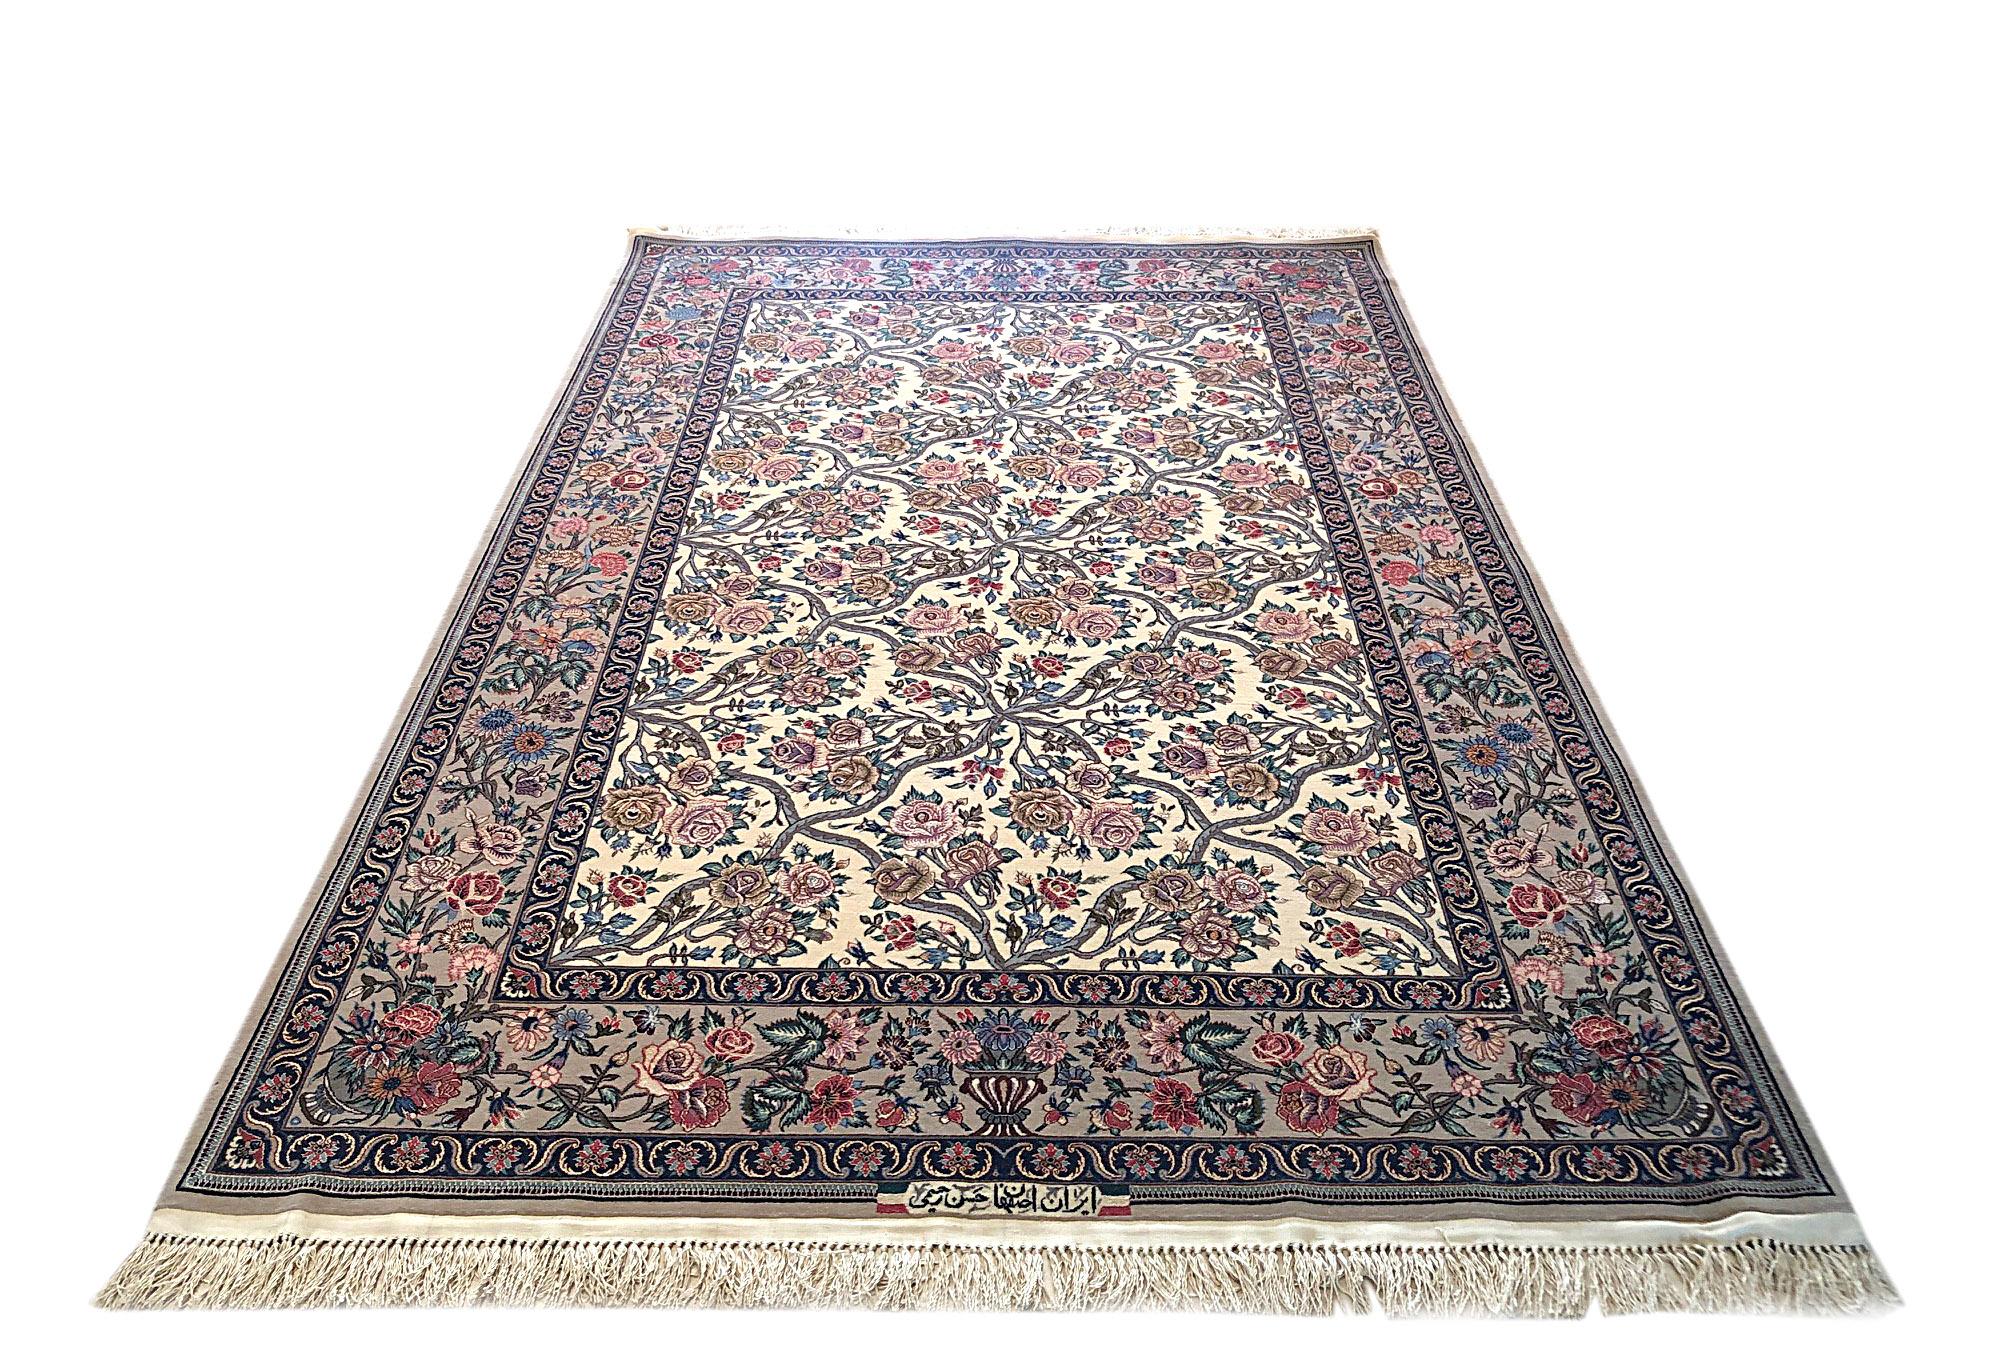 This authentic Persian Isfahan rug has kork wool and silk pile on silk foundation with an excellent condition. The color combination in this rug is absolutely outstanding. This Isfahan rug is excellent for decorative purpose, stunning floral pattern